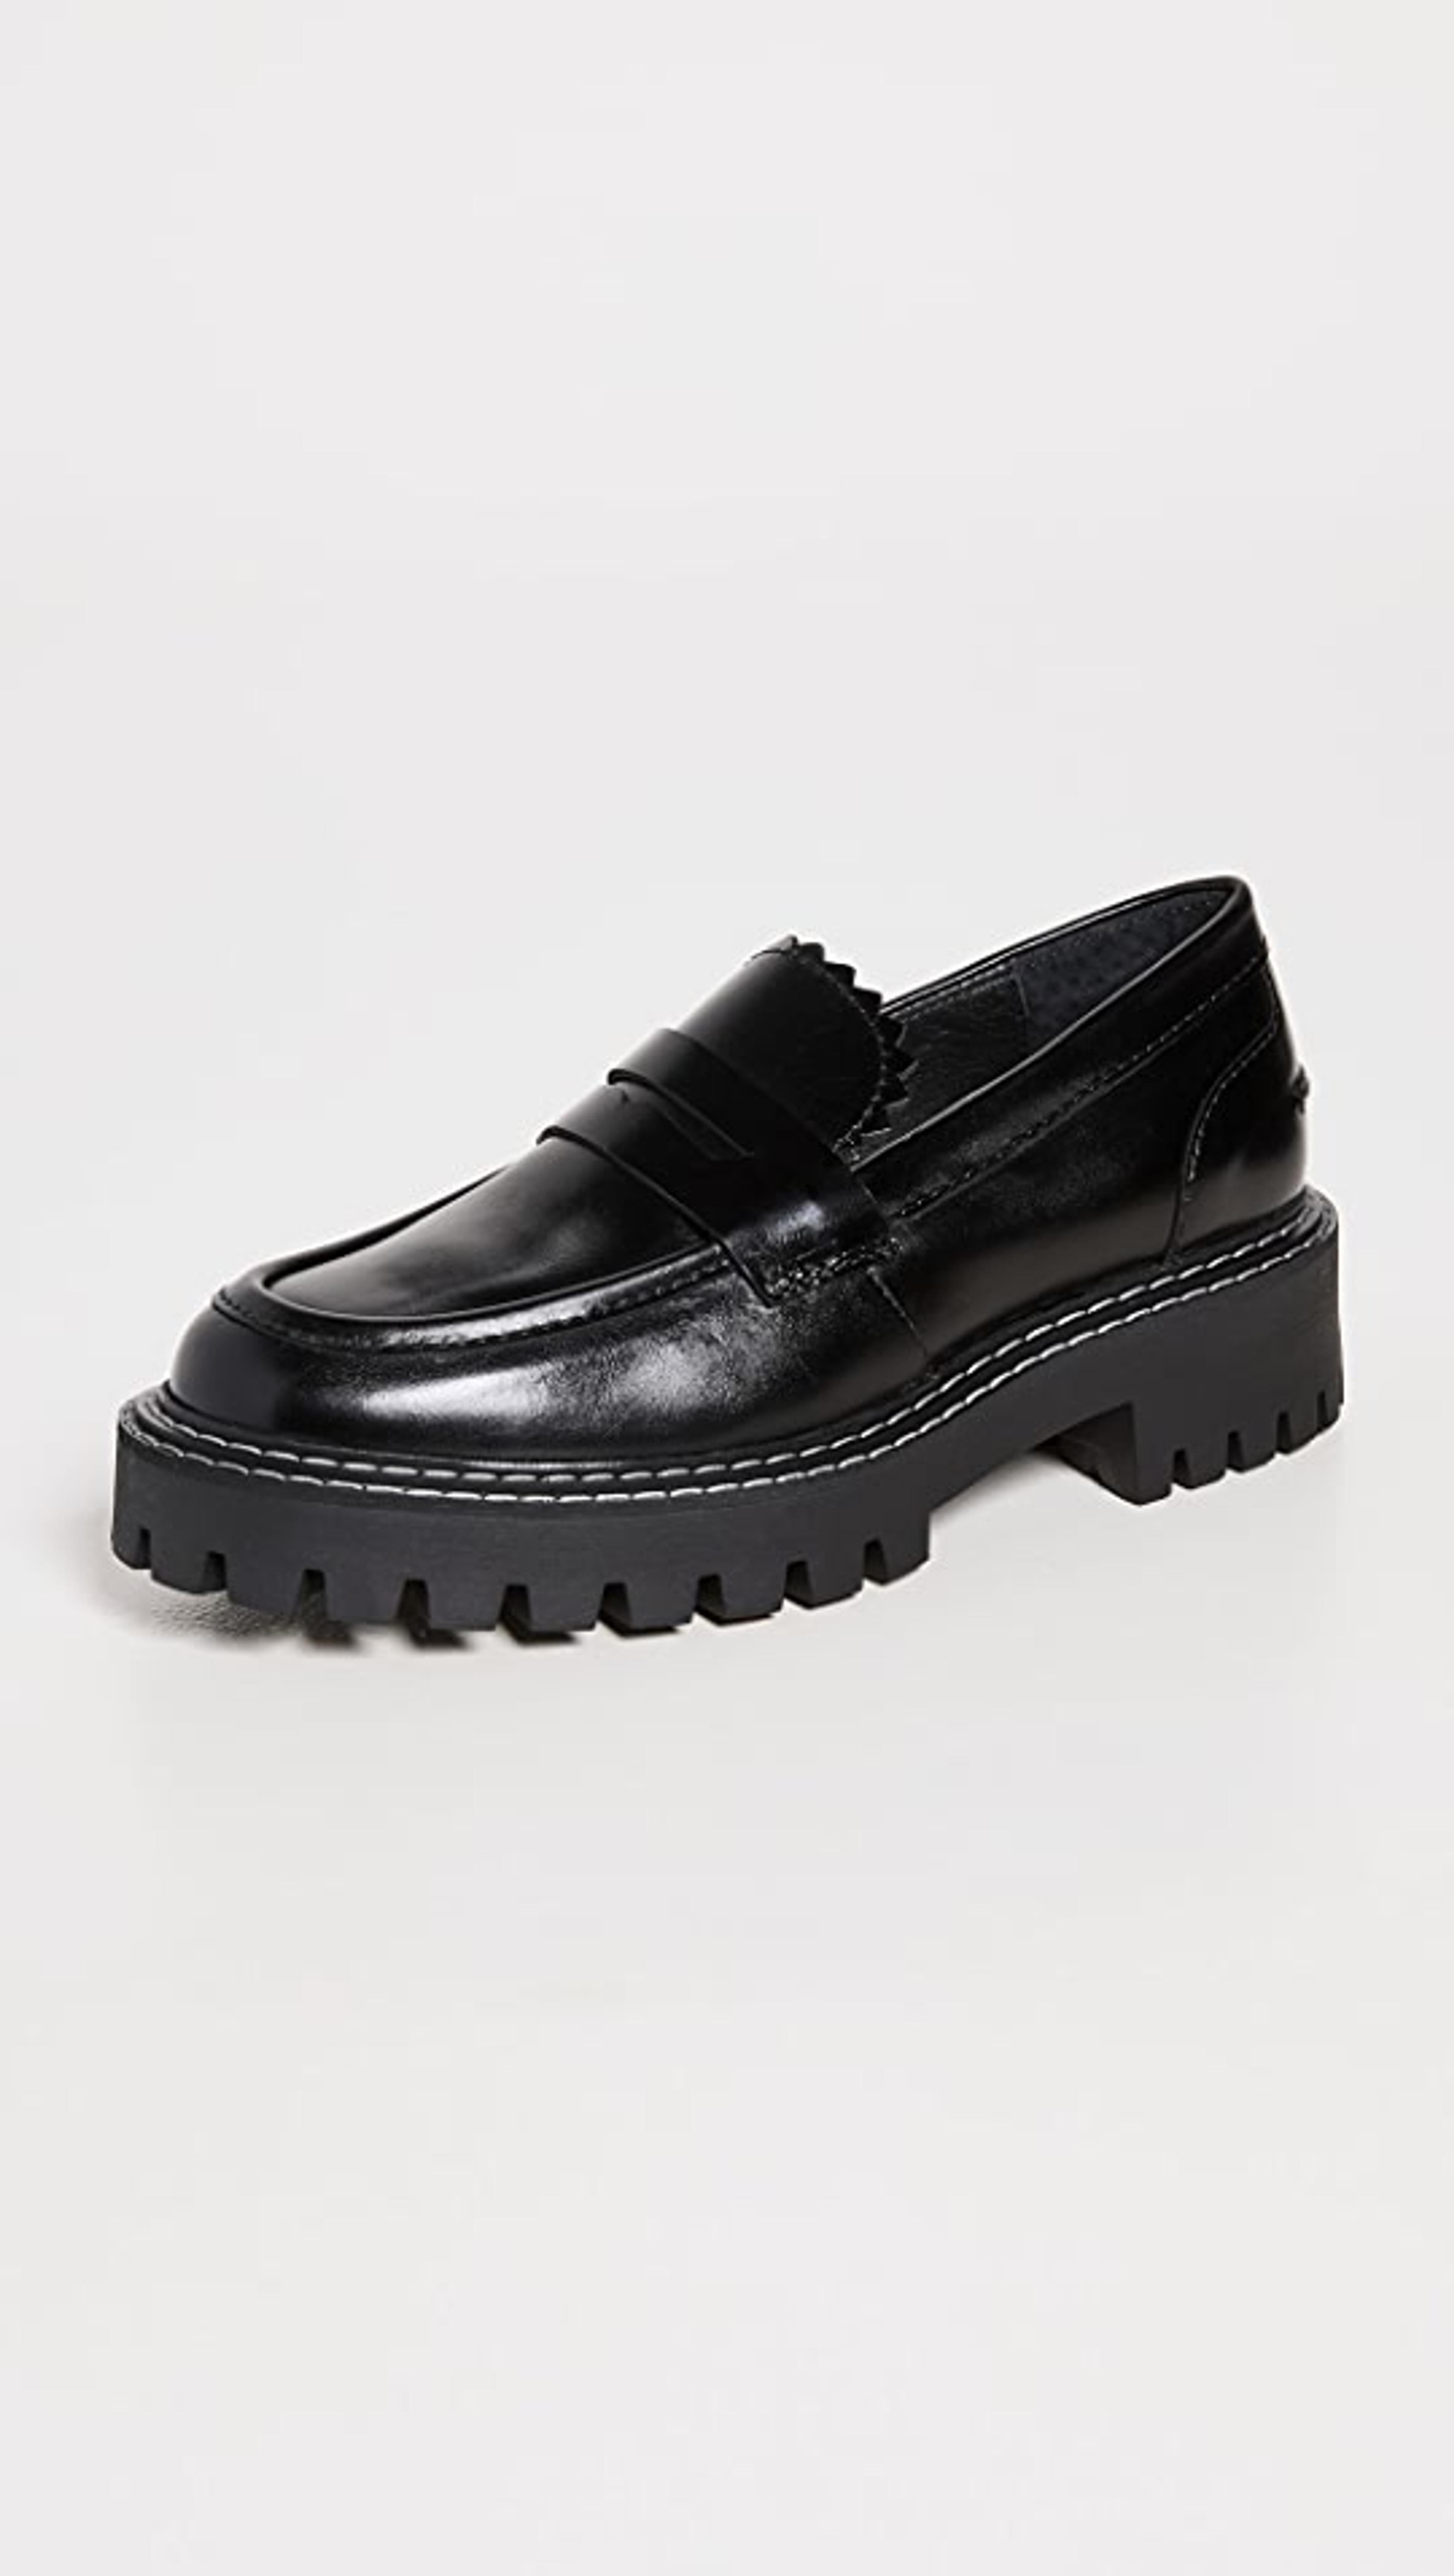 LAST Matter Loafers